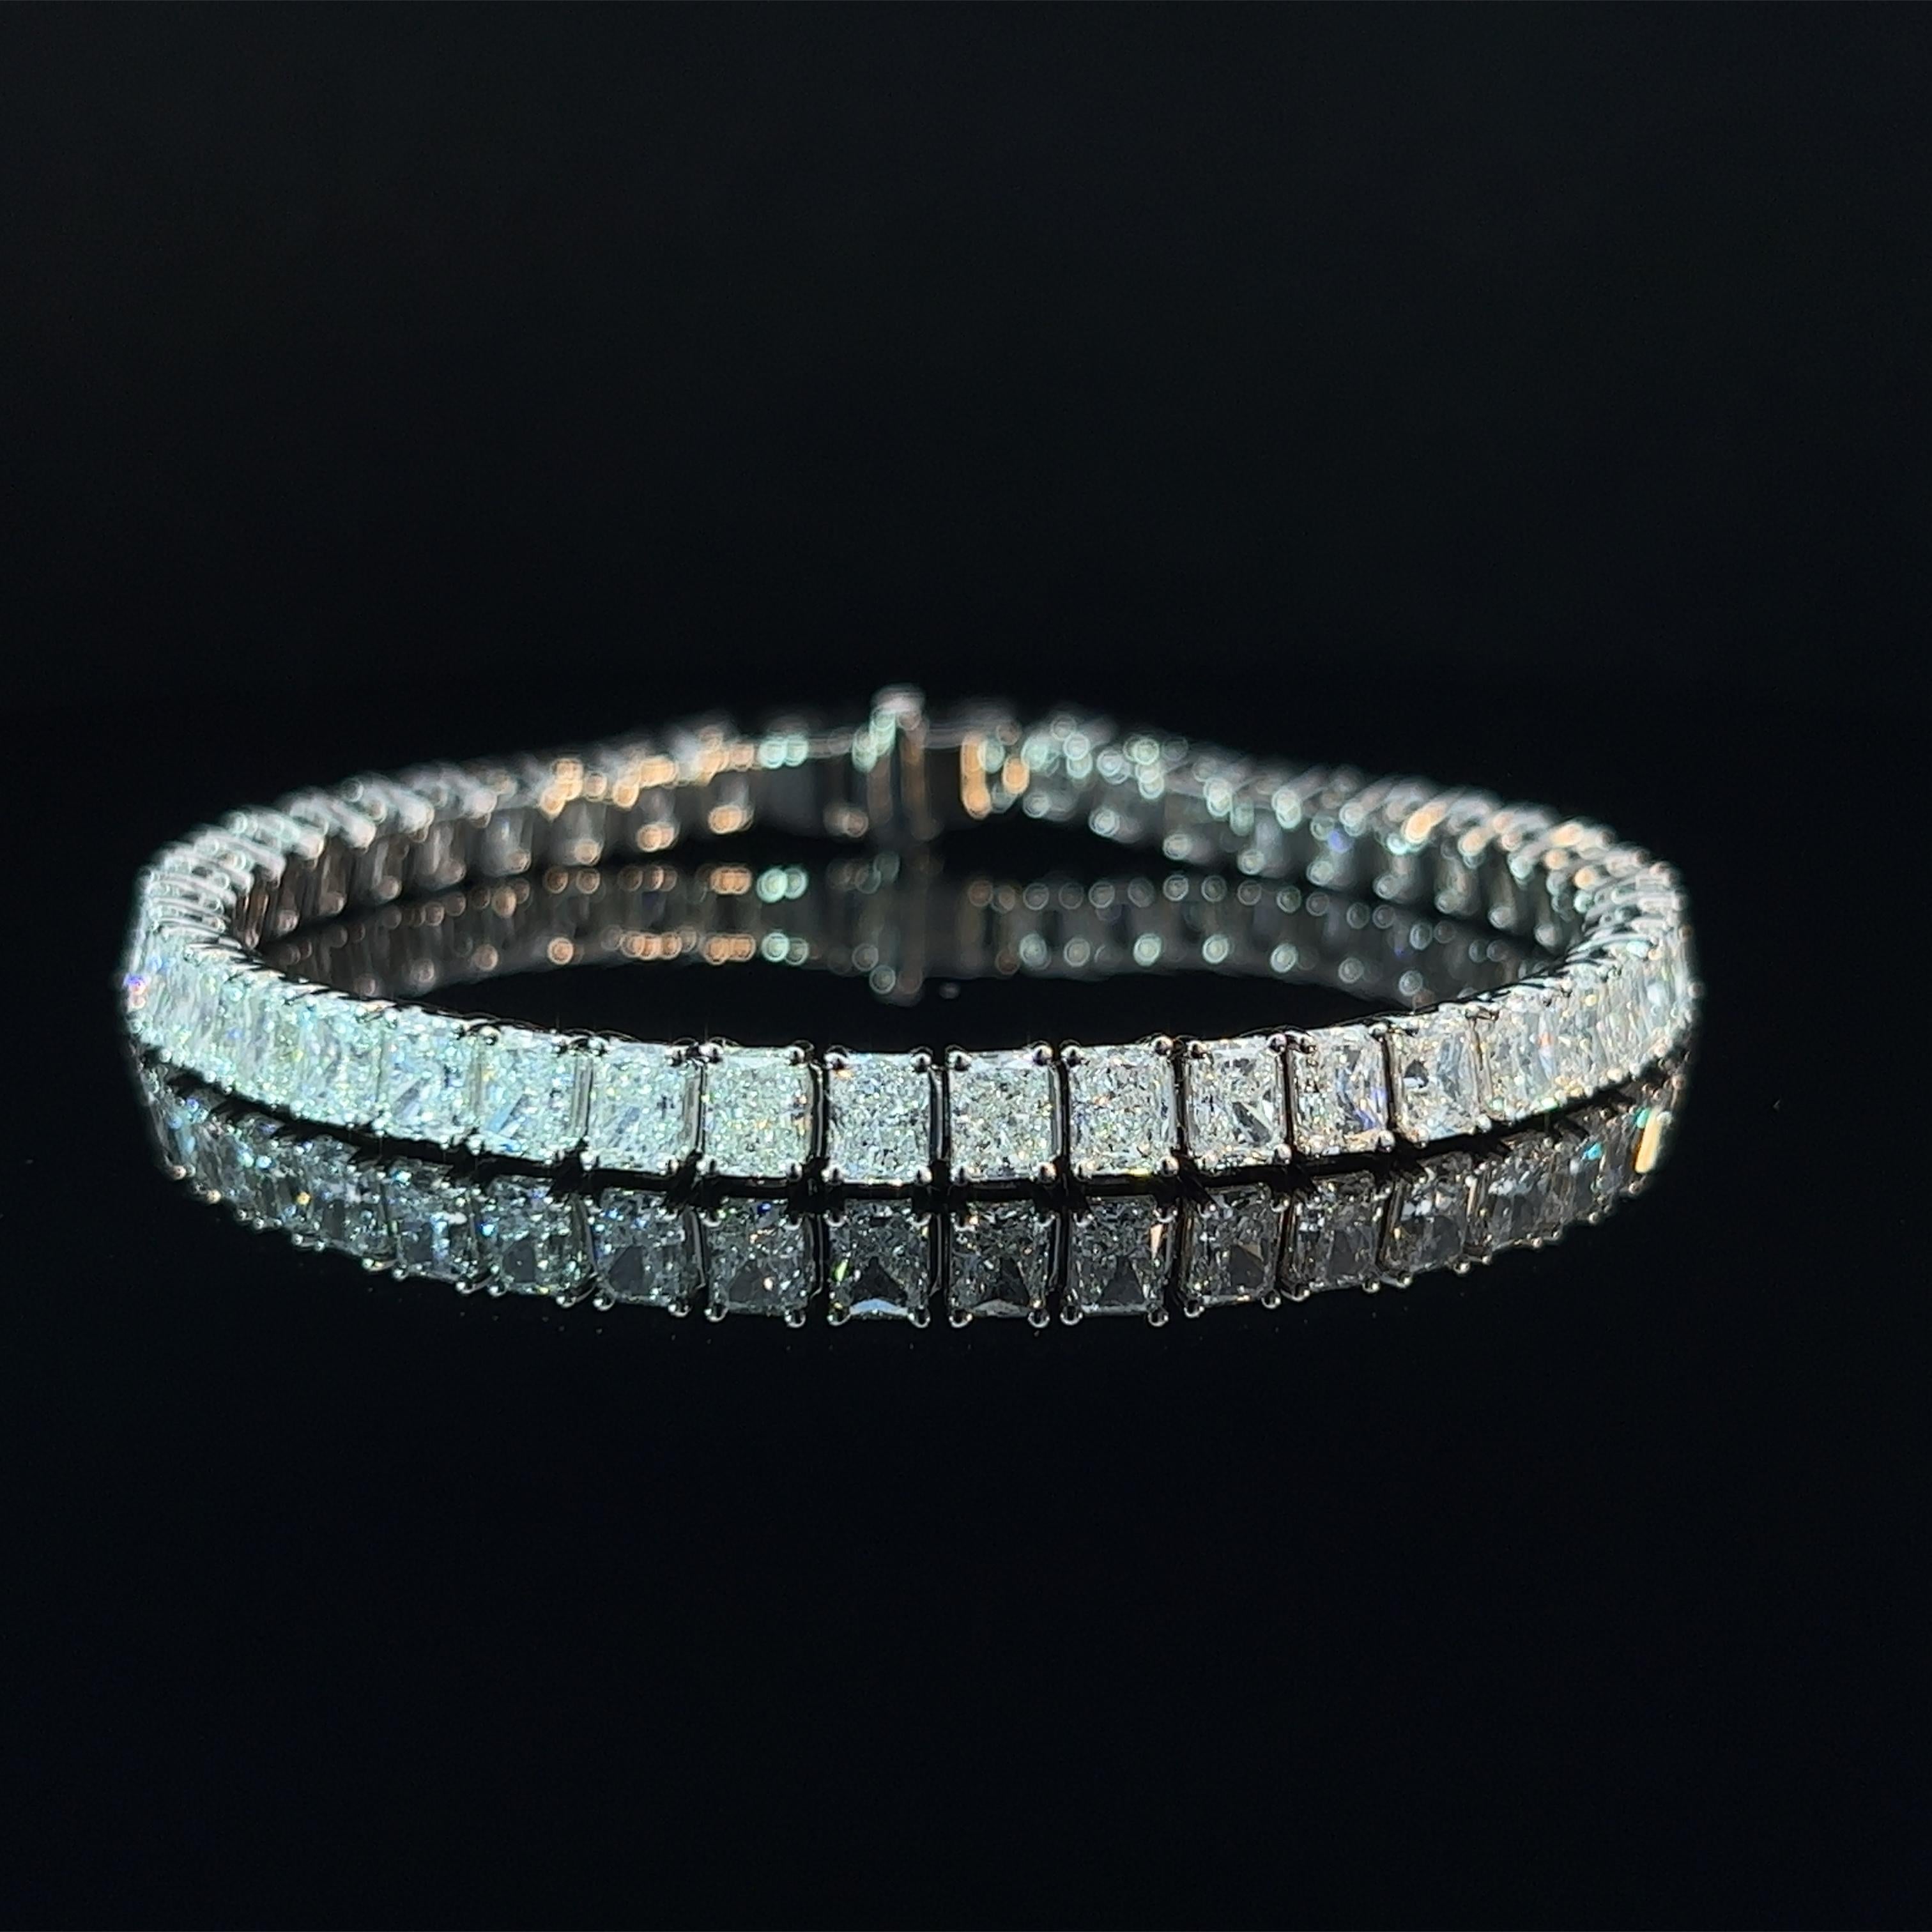 Diamond Shape: Radiant 
Total Diamond Weight: 13.92ct
Individual Diamond Weight: .33ct 
Color/Clarity: FG VVS  
Metal: Platinum
Metal Weight: 21.17g

Key Features:

Radiant-Cut Diamonds: The focal point of this bracelet consists of a series of